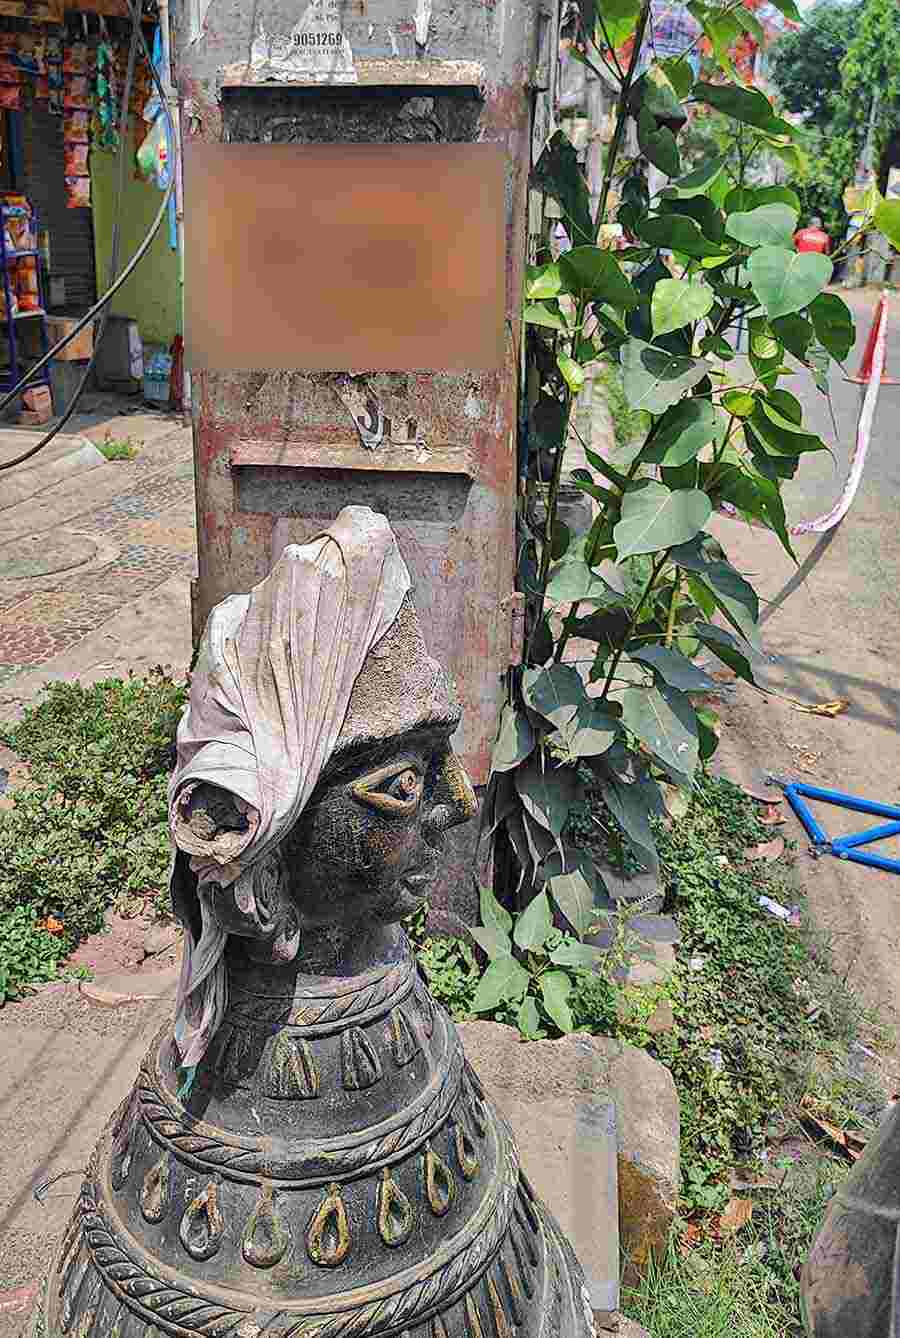 Various parts of the city have witnessed several beautification drives over the past few years. But poor maintenance has always remained a problem. This objet d’art on a pavement along Shyamnagar Road in South Dum Dum Municipality serves as a clothes drying stand for people